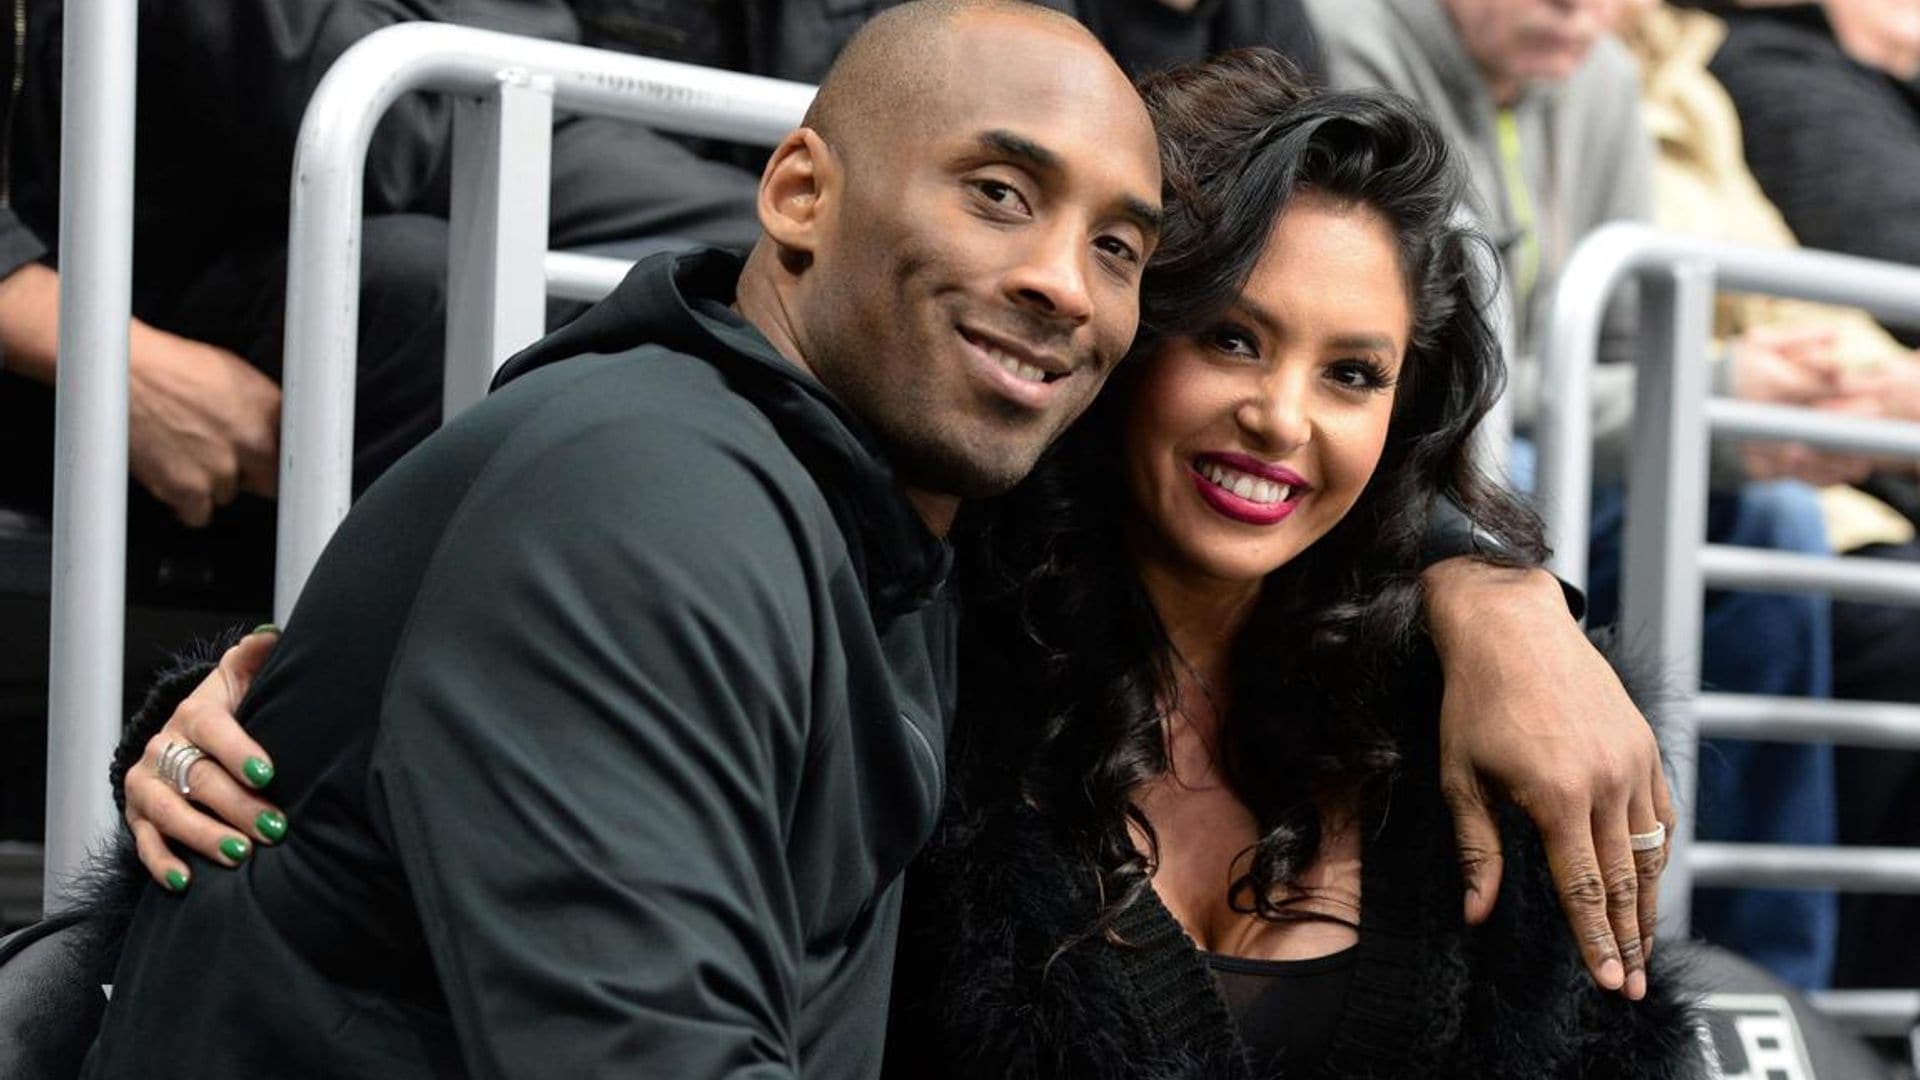 Vanessa Bryant pens touching birthday letter to Kobe Bryant: ‘Our lives feel so empty’